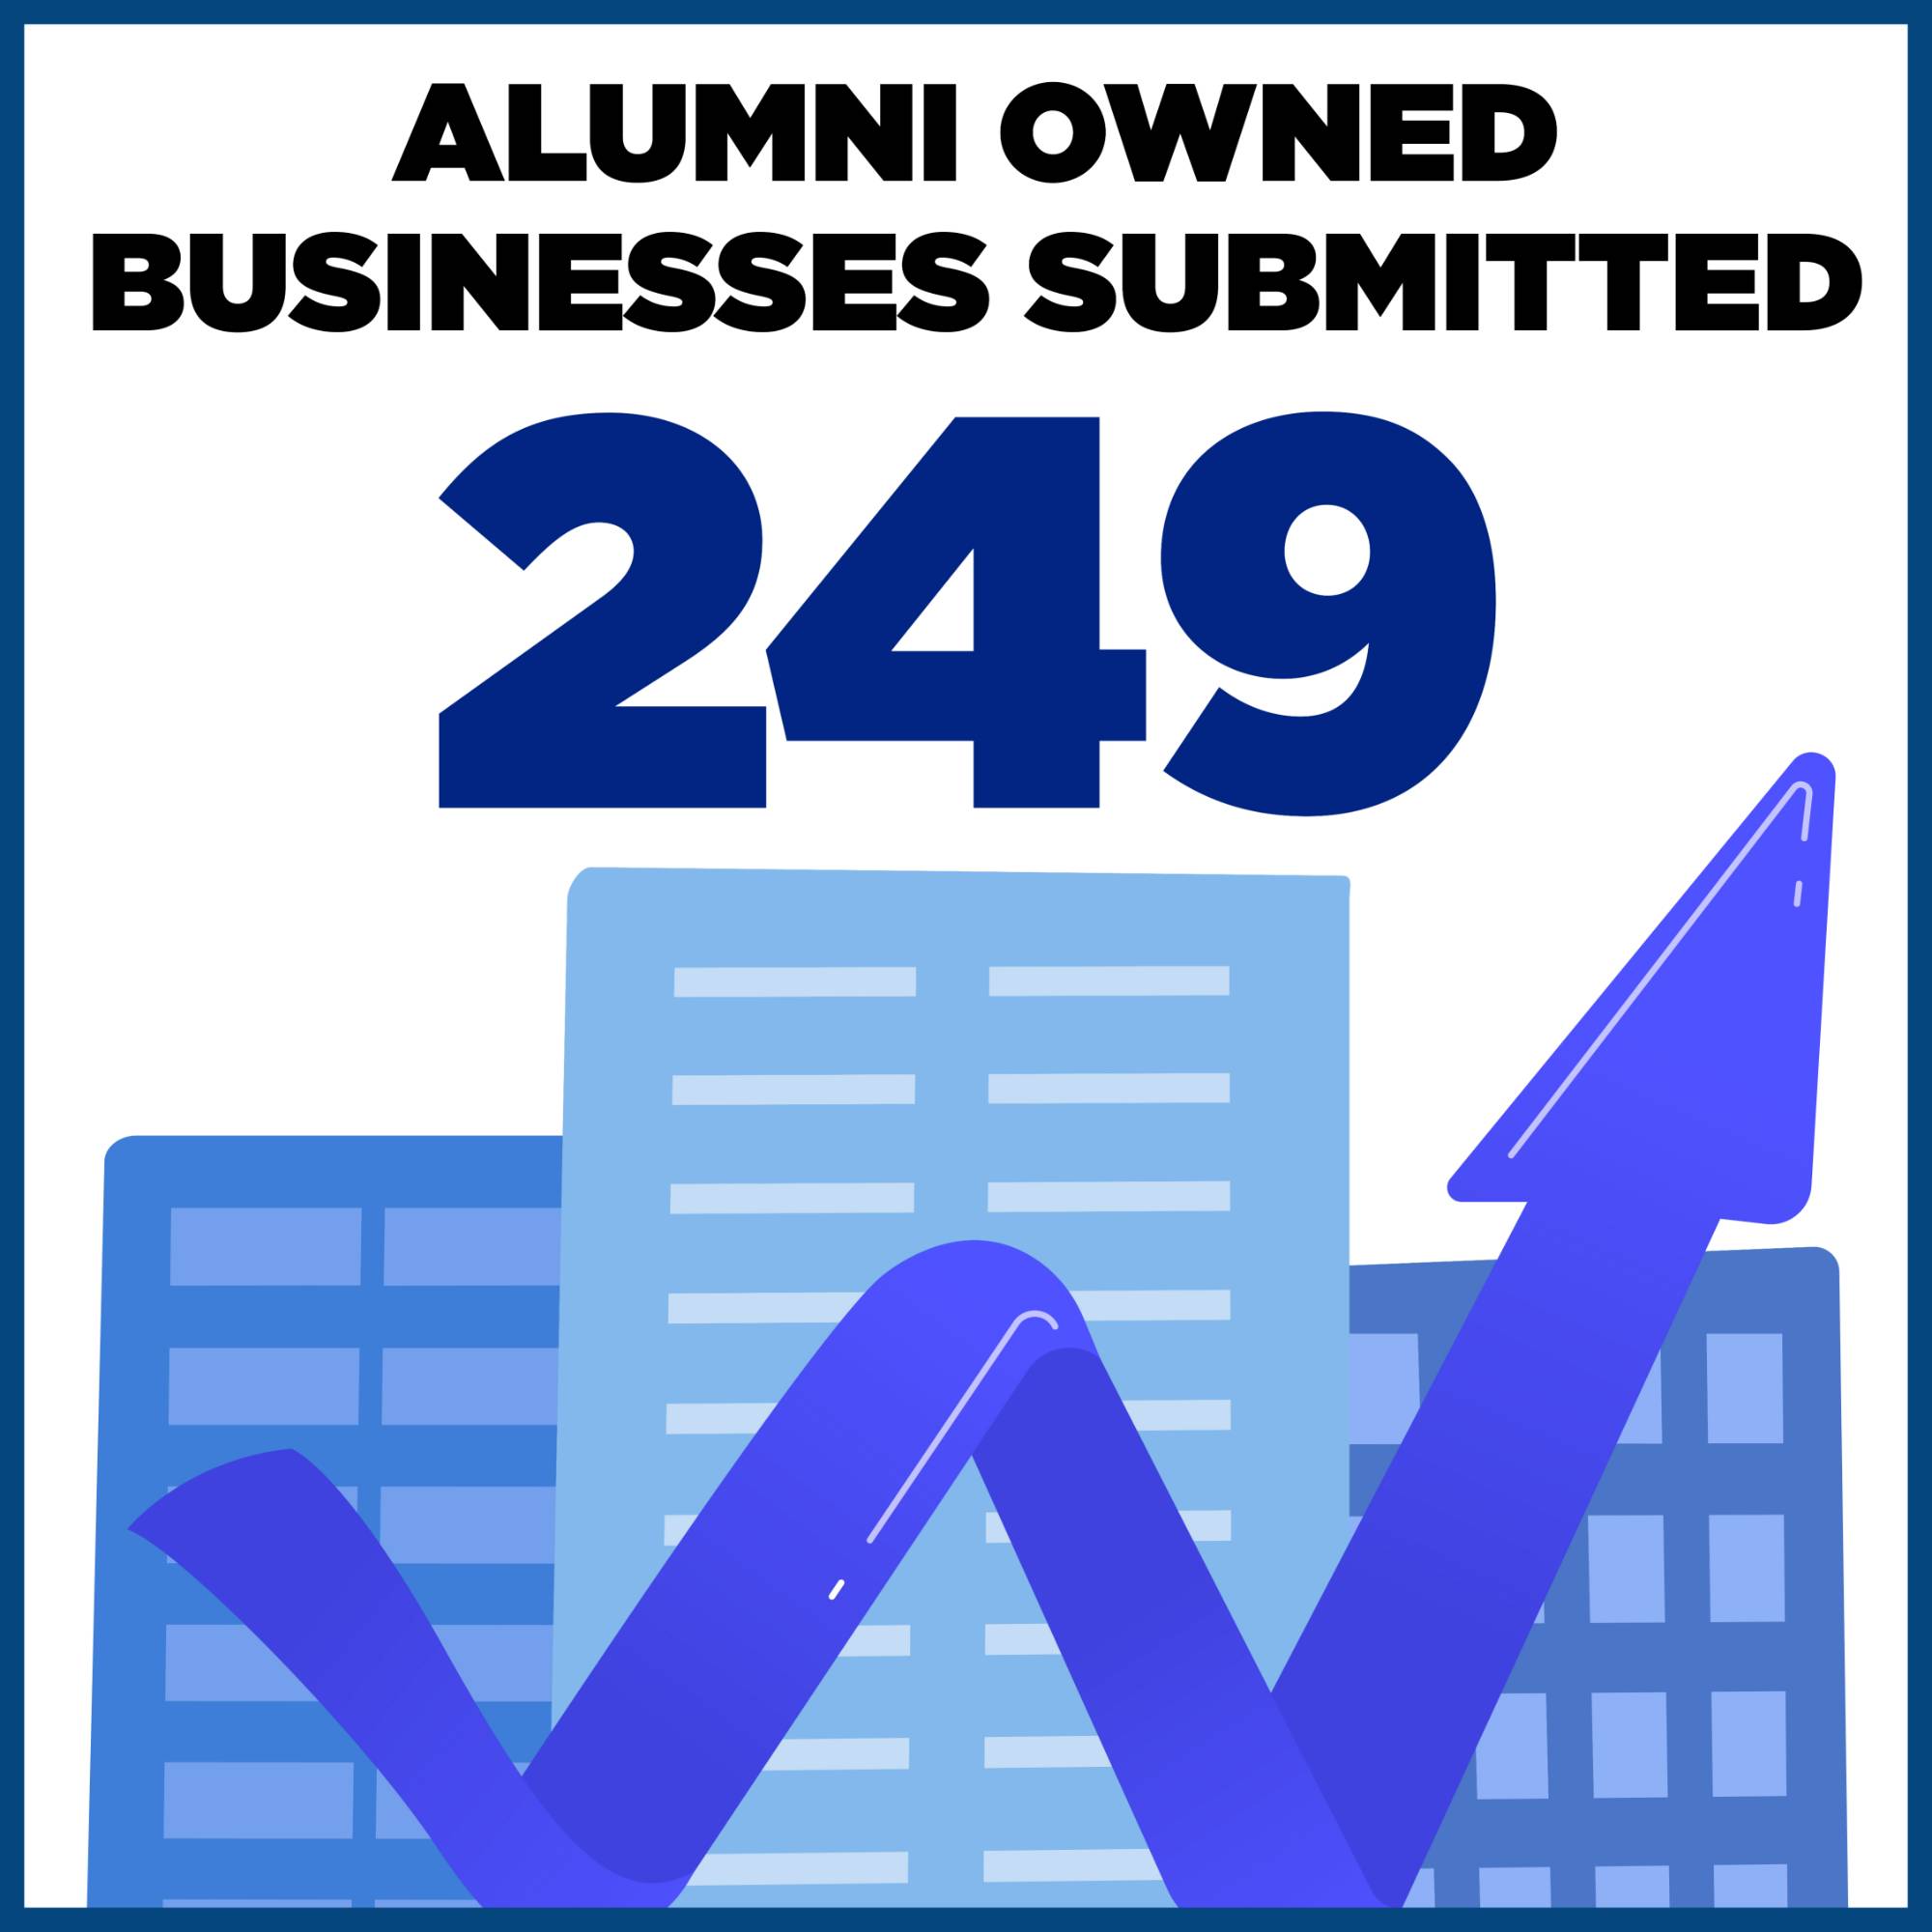 In the past year, a total of 249 Alumni Owned Businesses were submitted. The number is displayed over a computer illustration of tall city buildings.